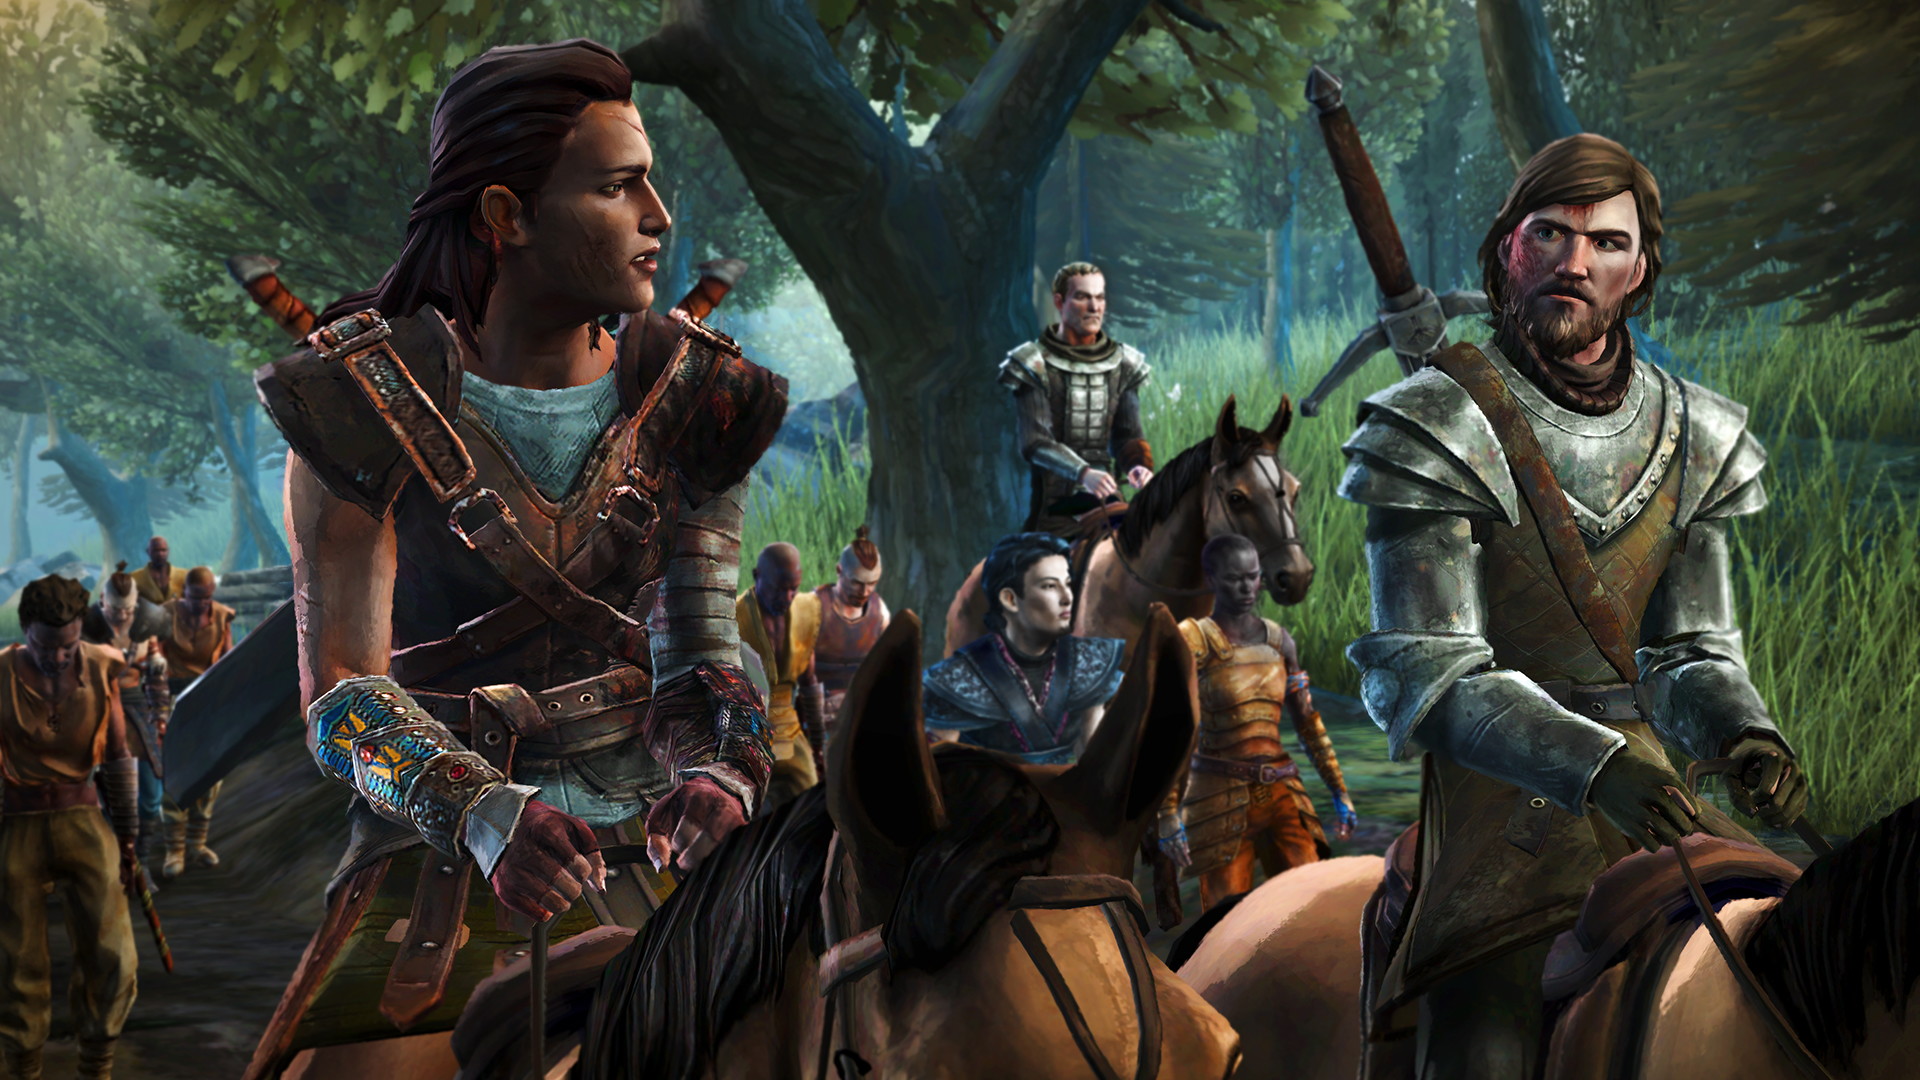 Game of Thrones: A Telltale Games Series - Episode 6: The Ice Dragon - screenshot 5